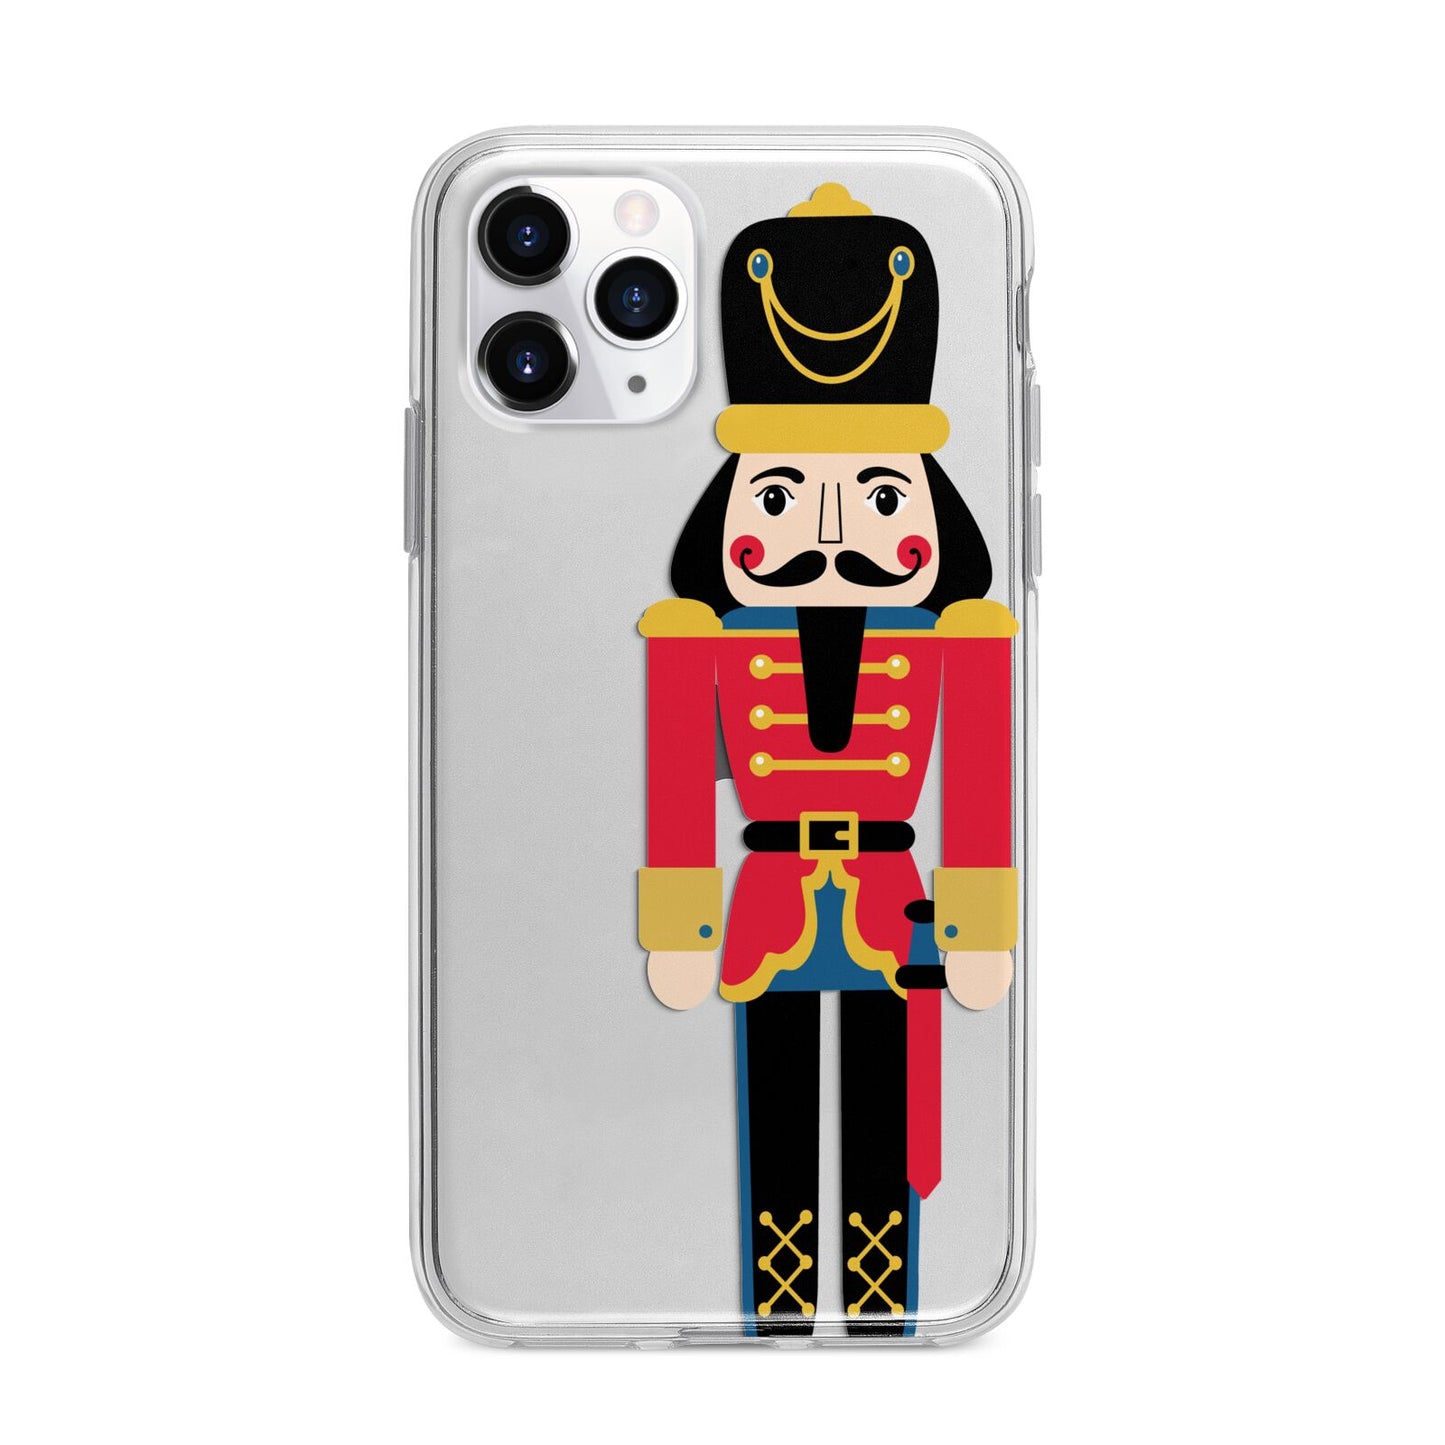 The Nutcracker Apple iPhone 11 Pro in Silver with Bumper Case